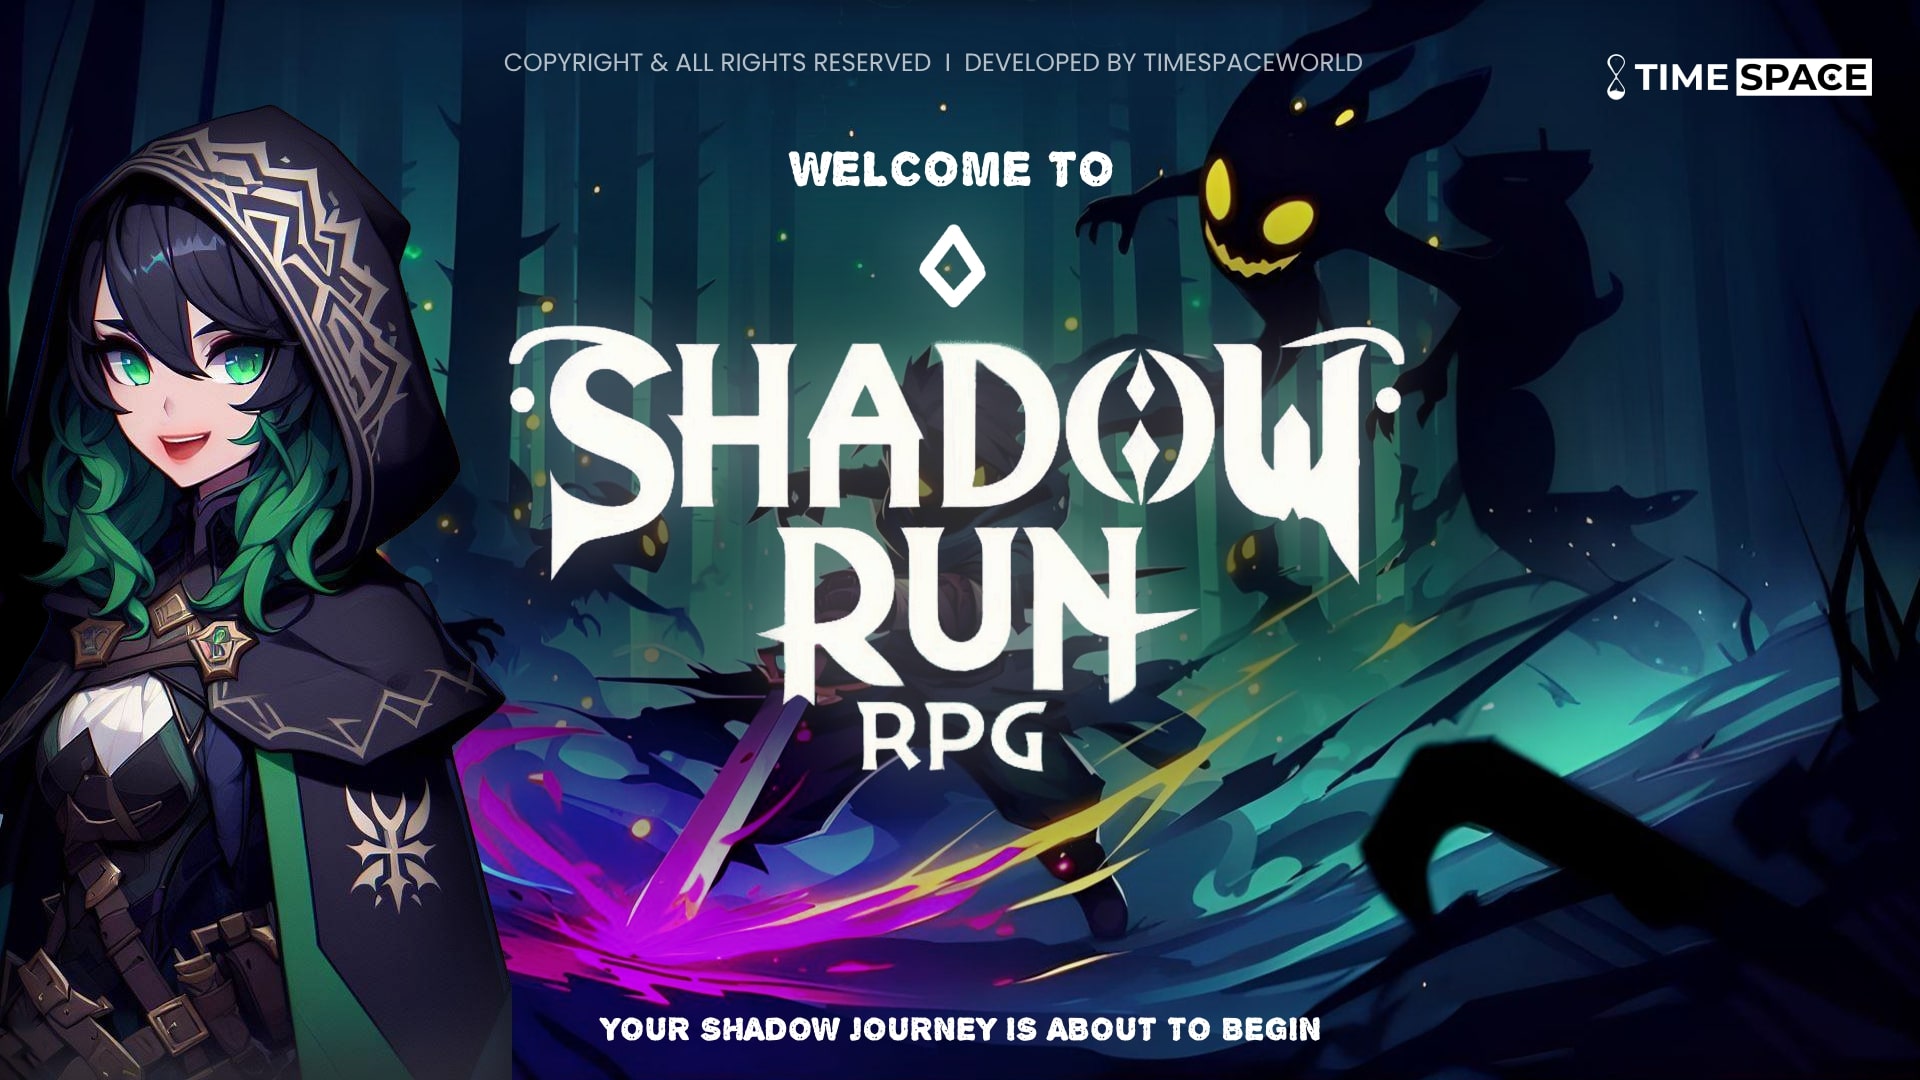 Shadow run - Action RPG is on Google Play now - Games showcase